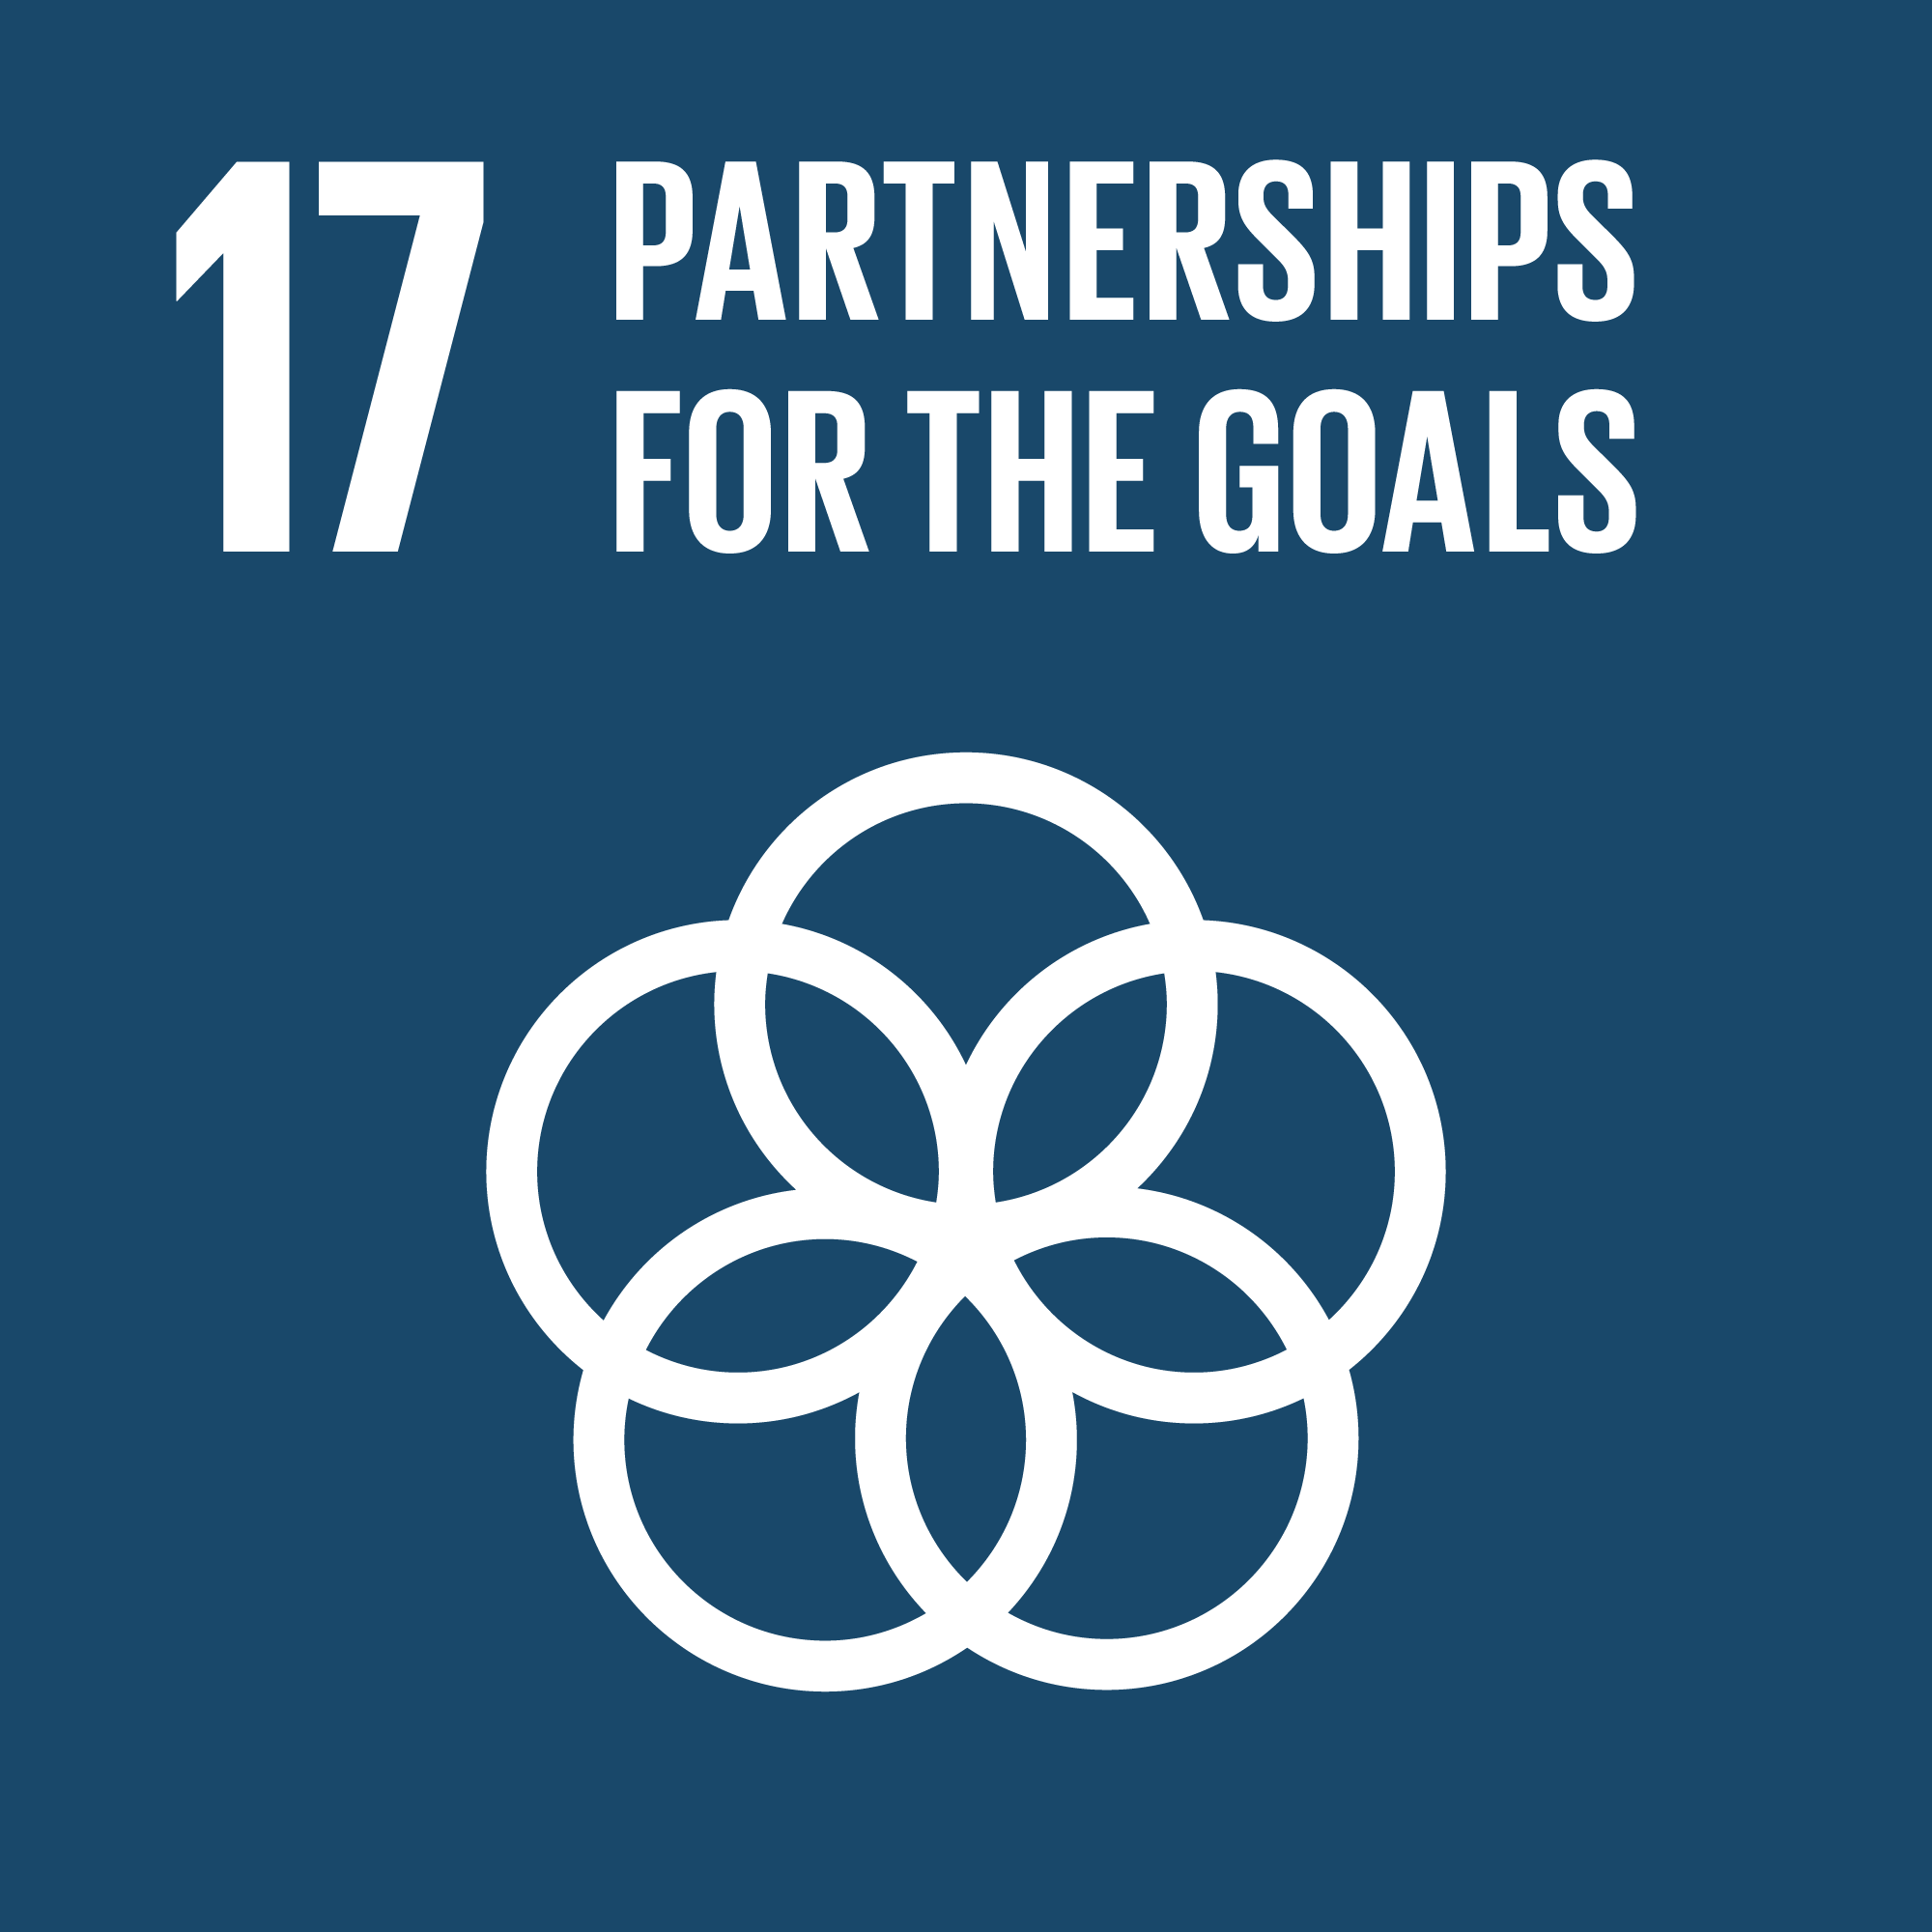 UN sustainability goal number 17